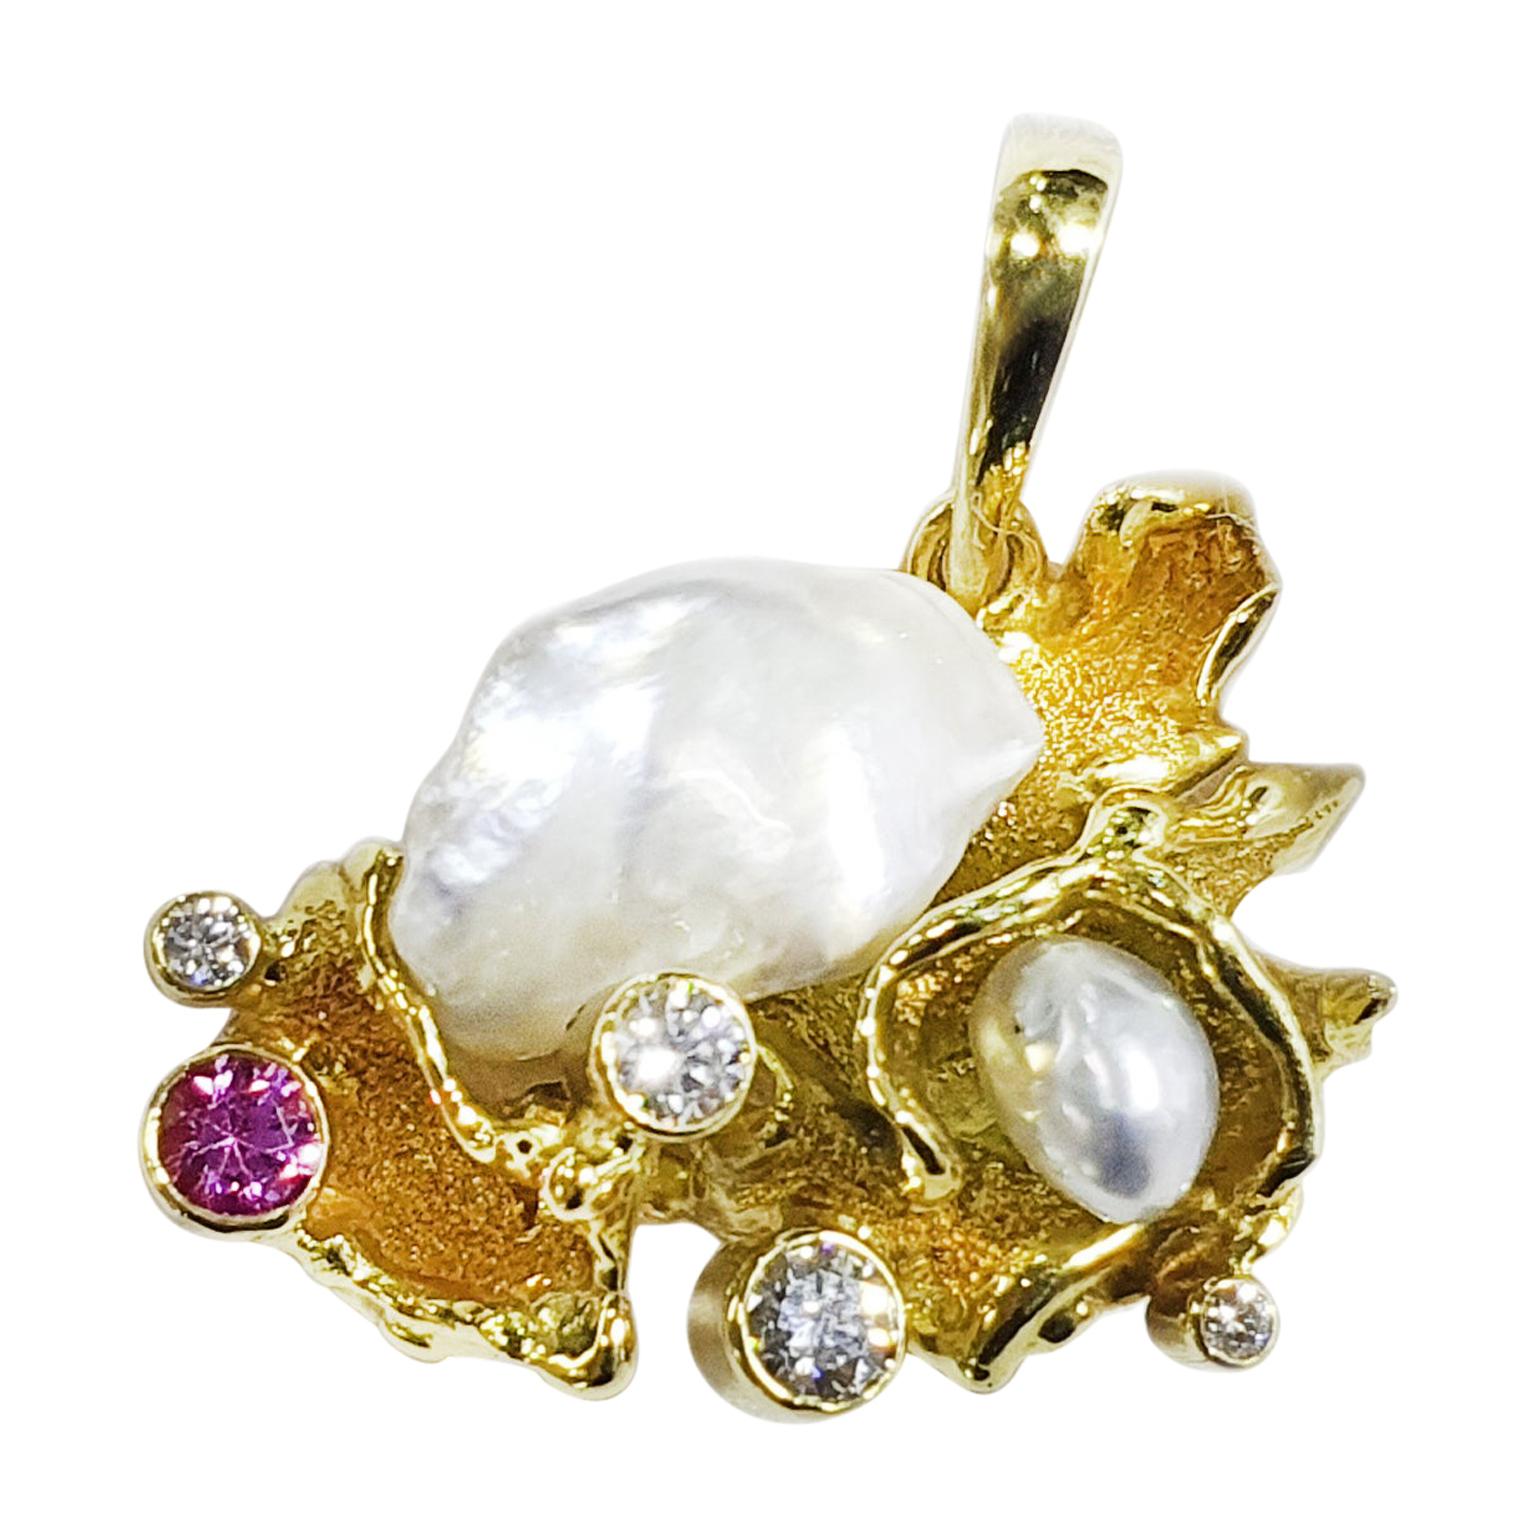 Paul Amey 18k Gold, Diamond, Broome Keshi Pearl and Pink Sapphire Pendant For Sale